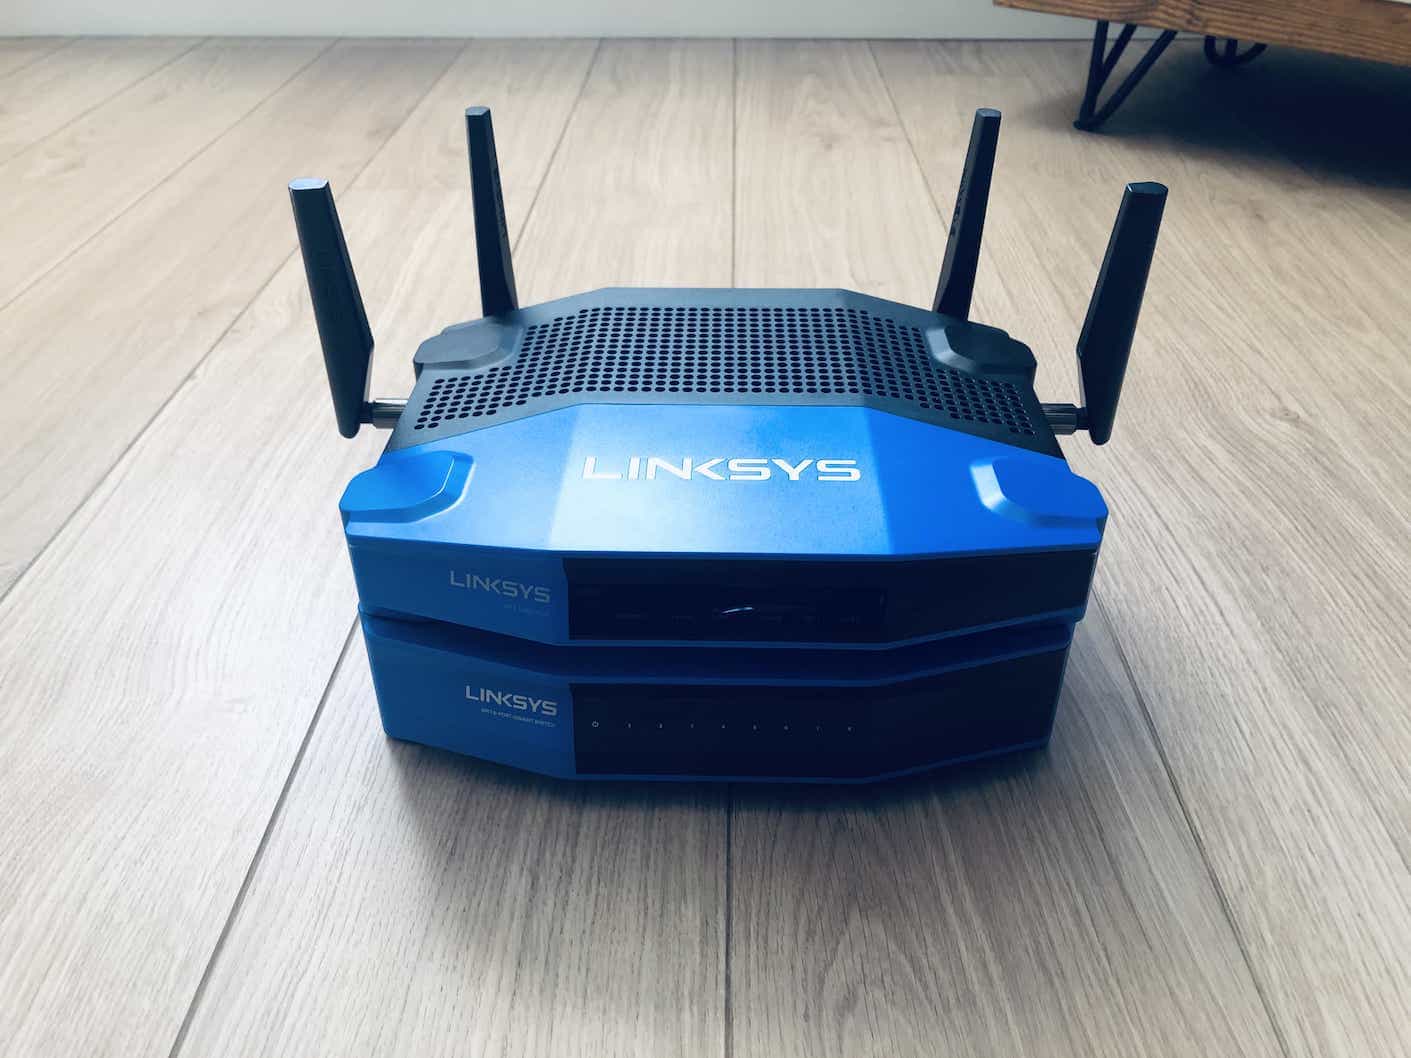 OpenWRT Linksys WRT1900ACS router